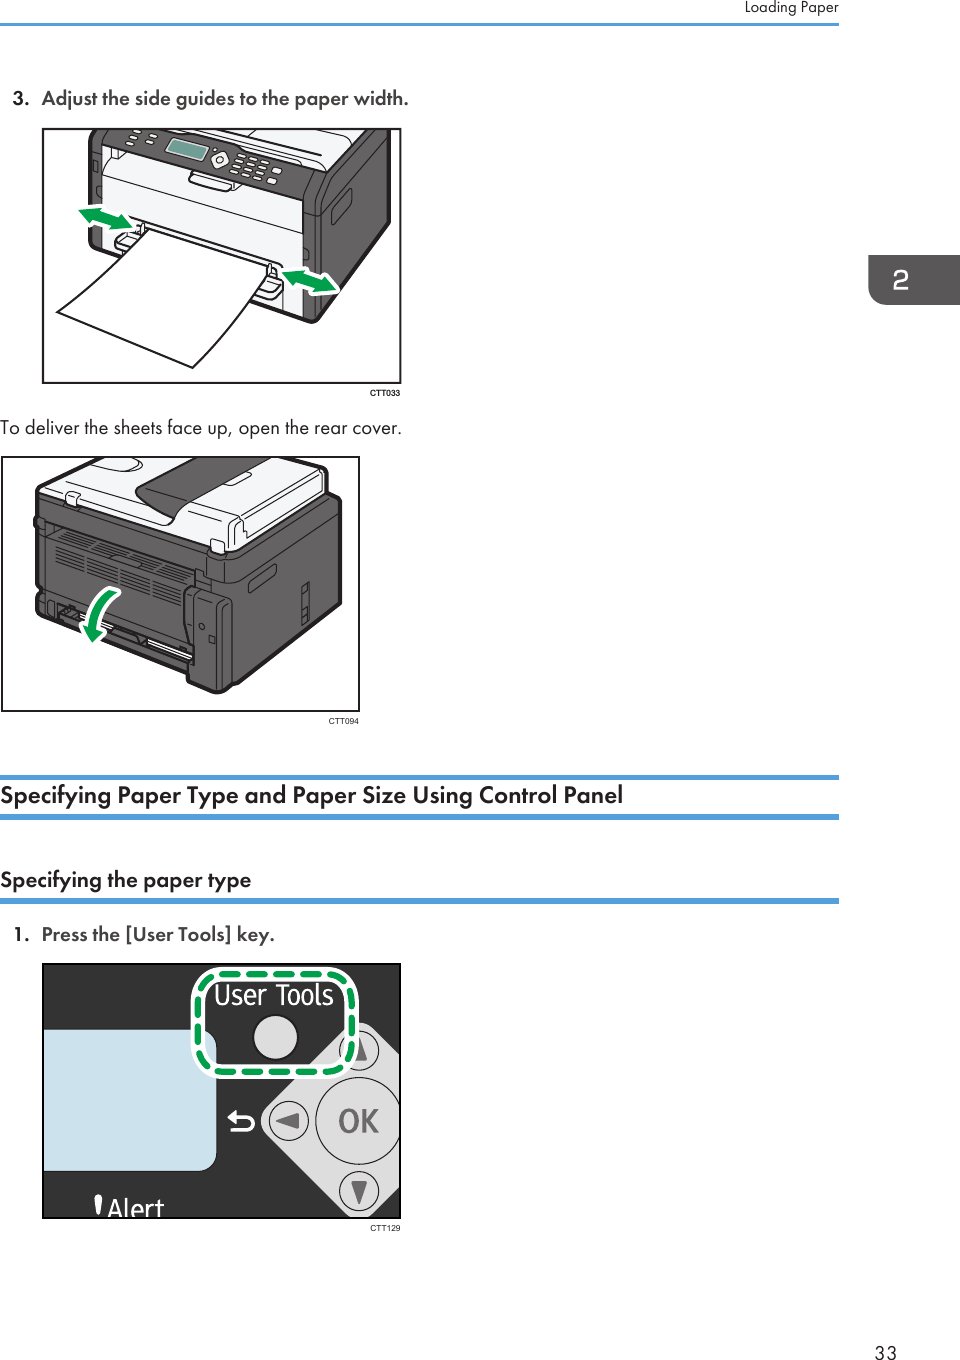 3. Adjust the side guides to the paper width.CTT033To deliver the sheets face up, open the rear cover.CTT094Specifying Paper Type and Paper Size Using Control PanelSpecifying the paper type1. Press the [User Tools] key.CTT129Loading Paper33